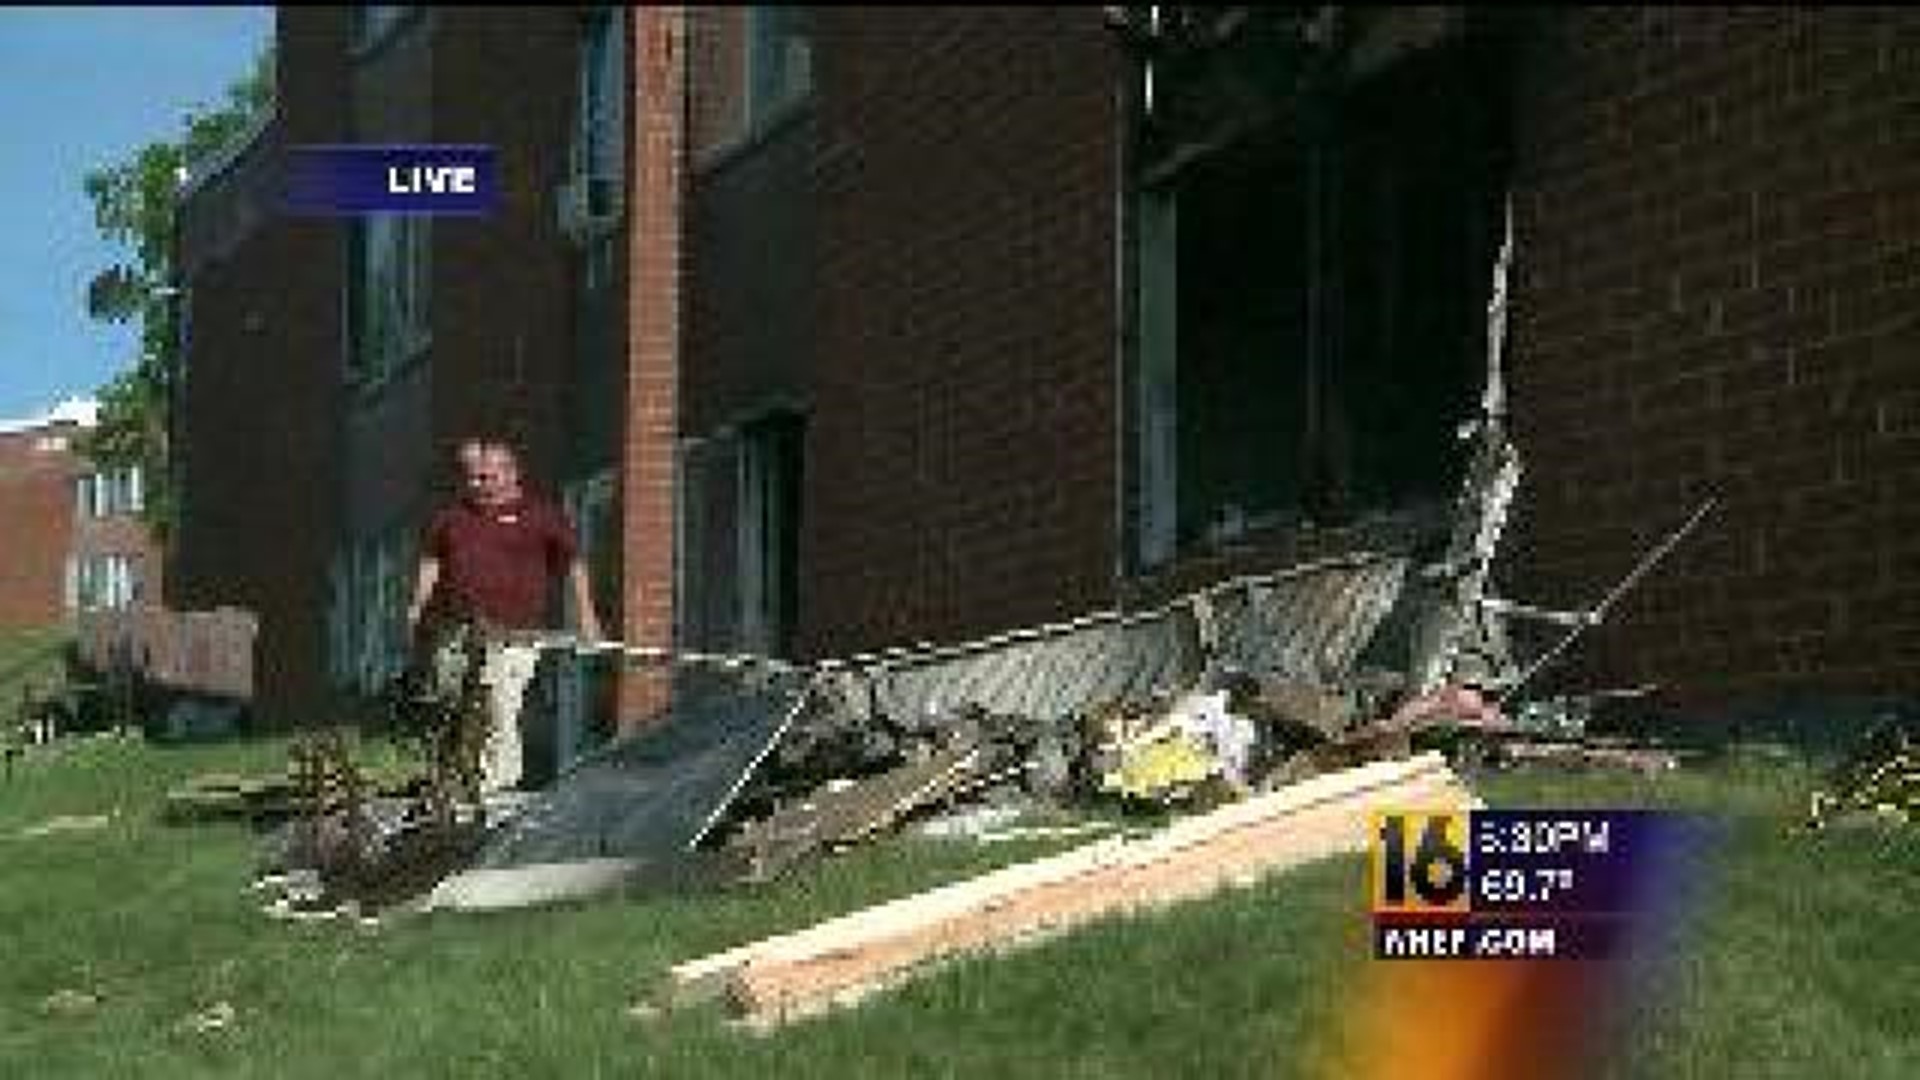 Families Return Home After Fire Displaces 13